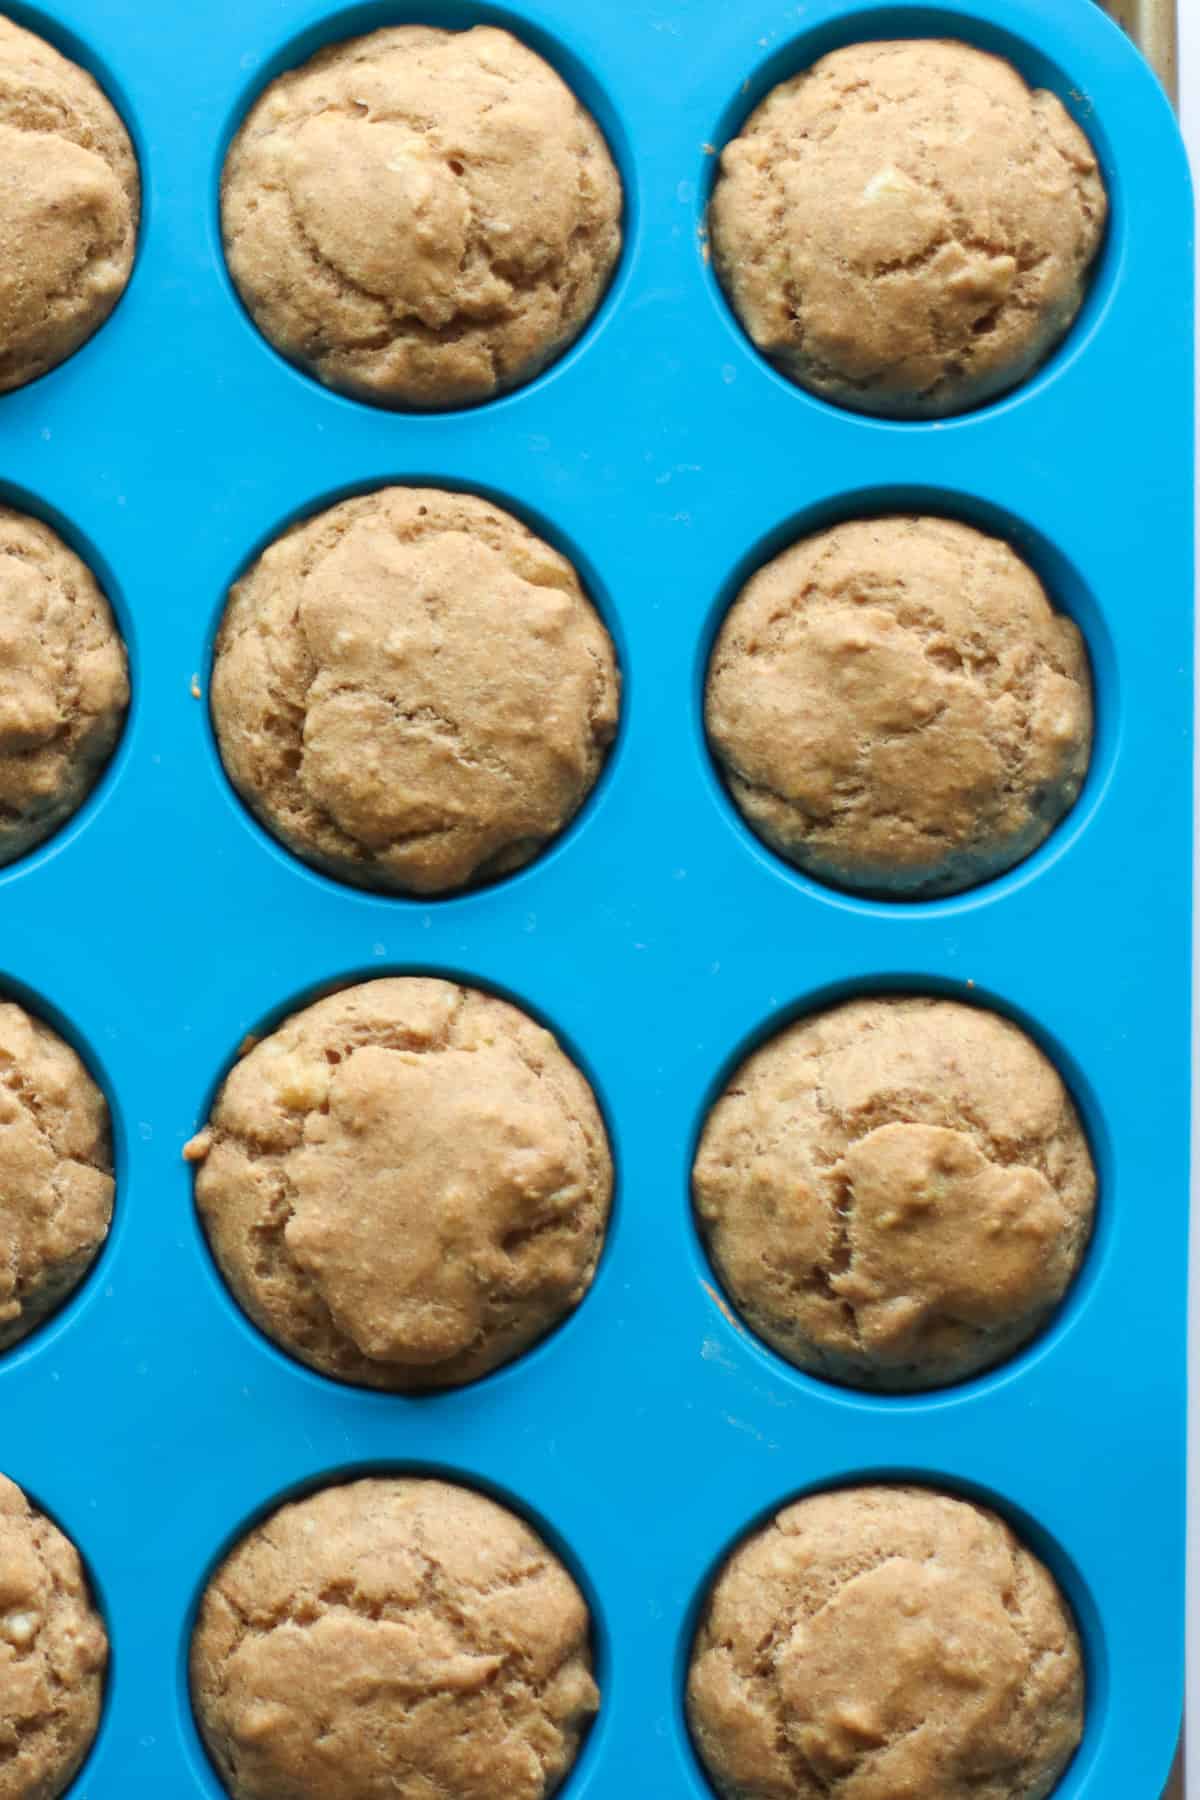 Baked muffins in a blue silicone muffin pan.